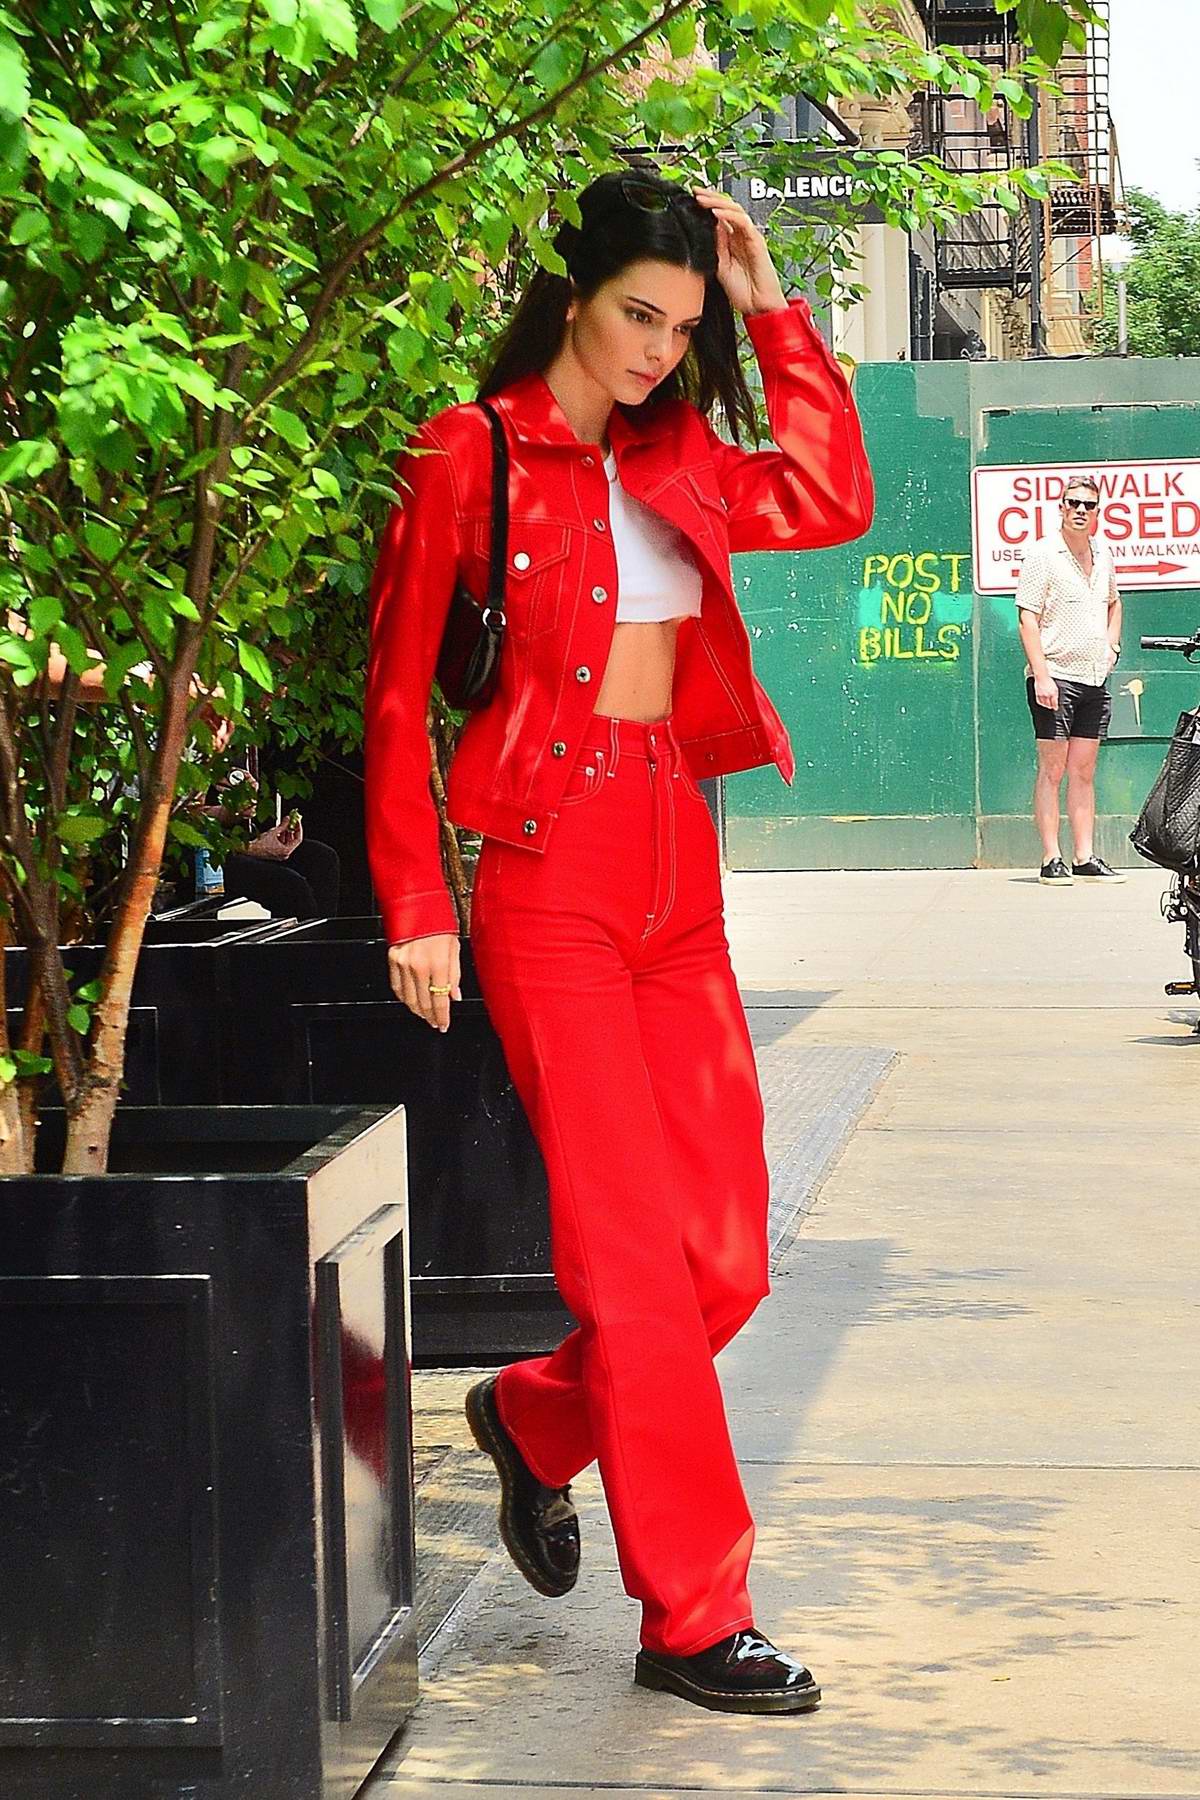 Kendall Jenner turns heads as she steps out in a matching red denim outfit  in SoHo